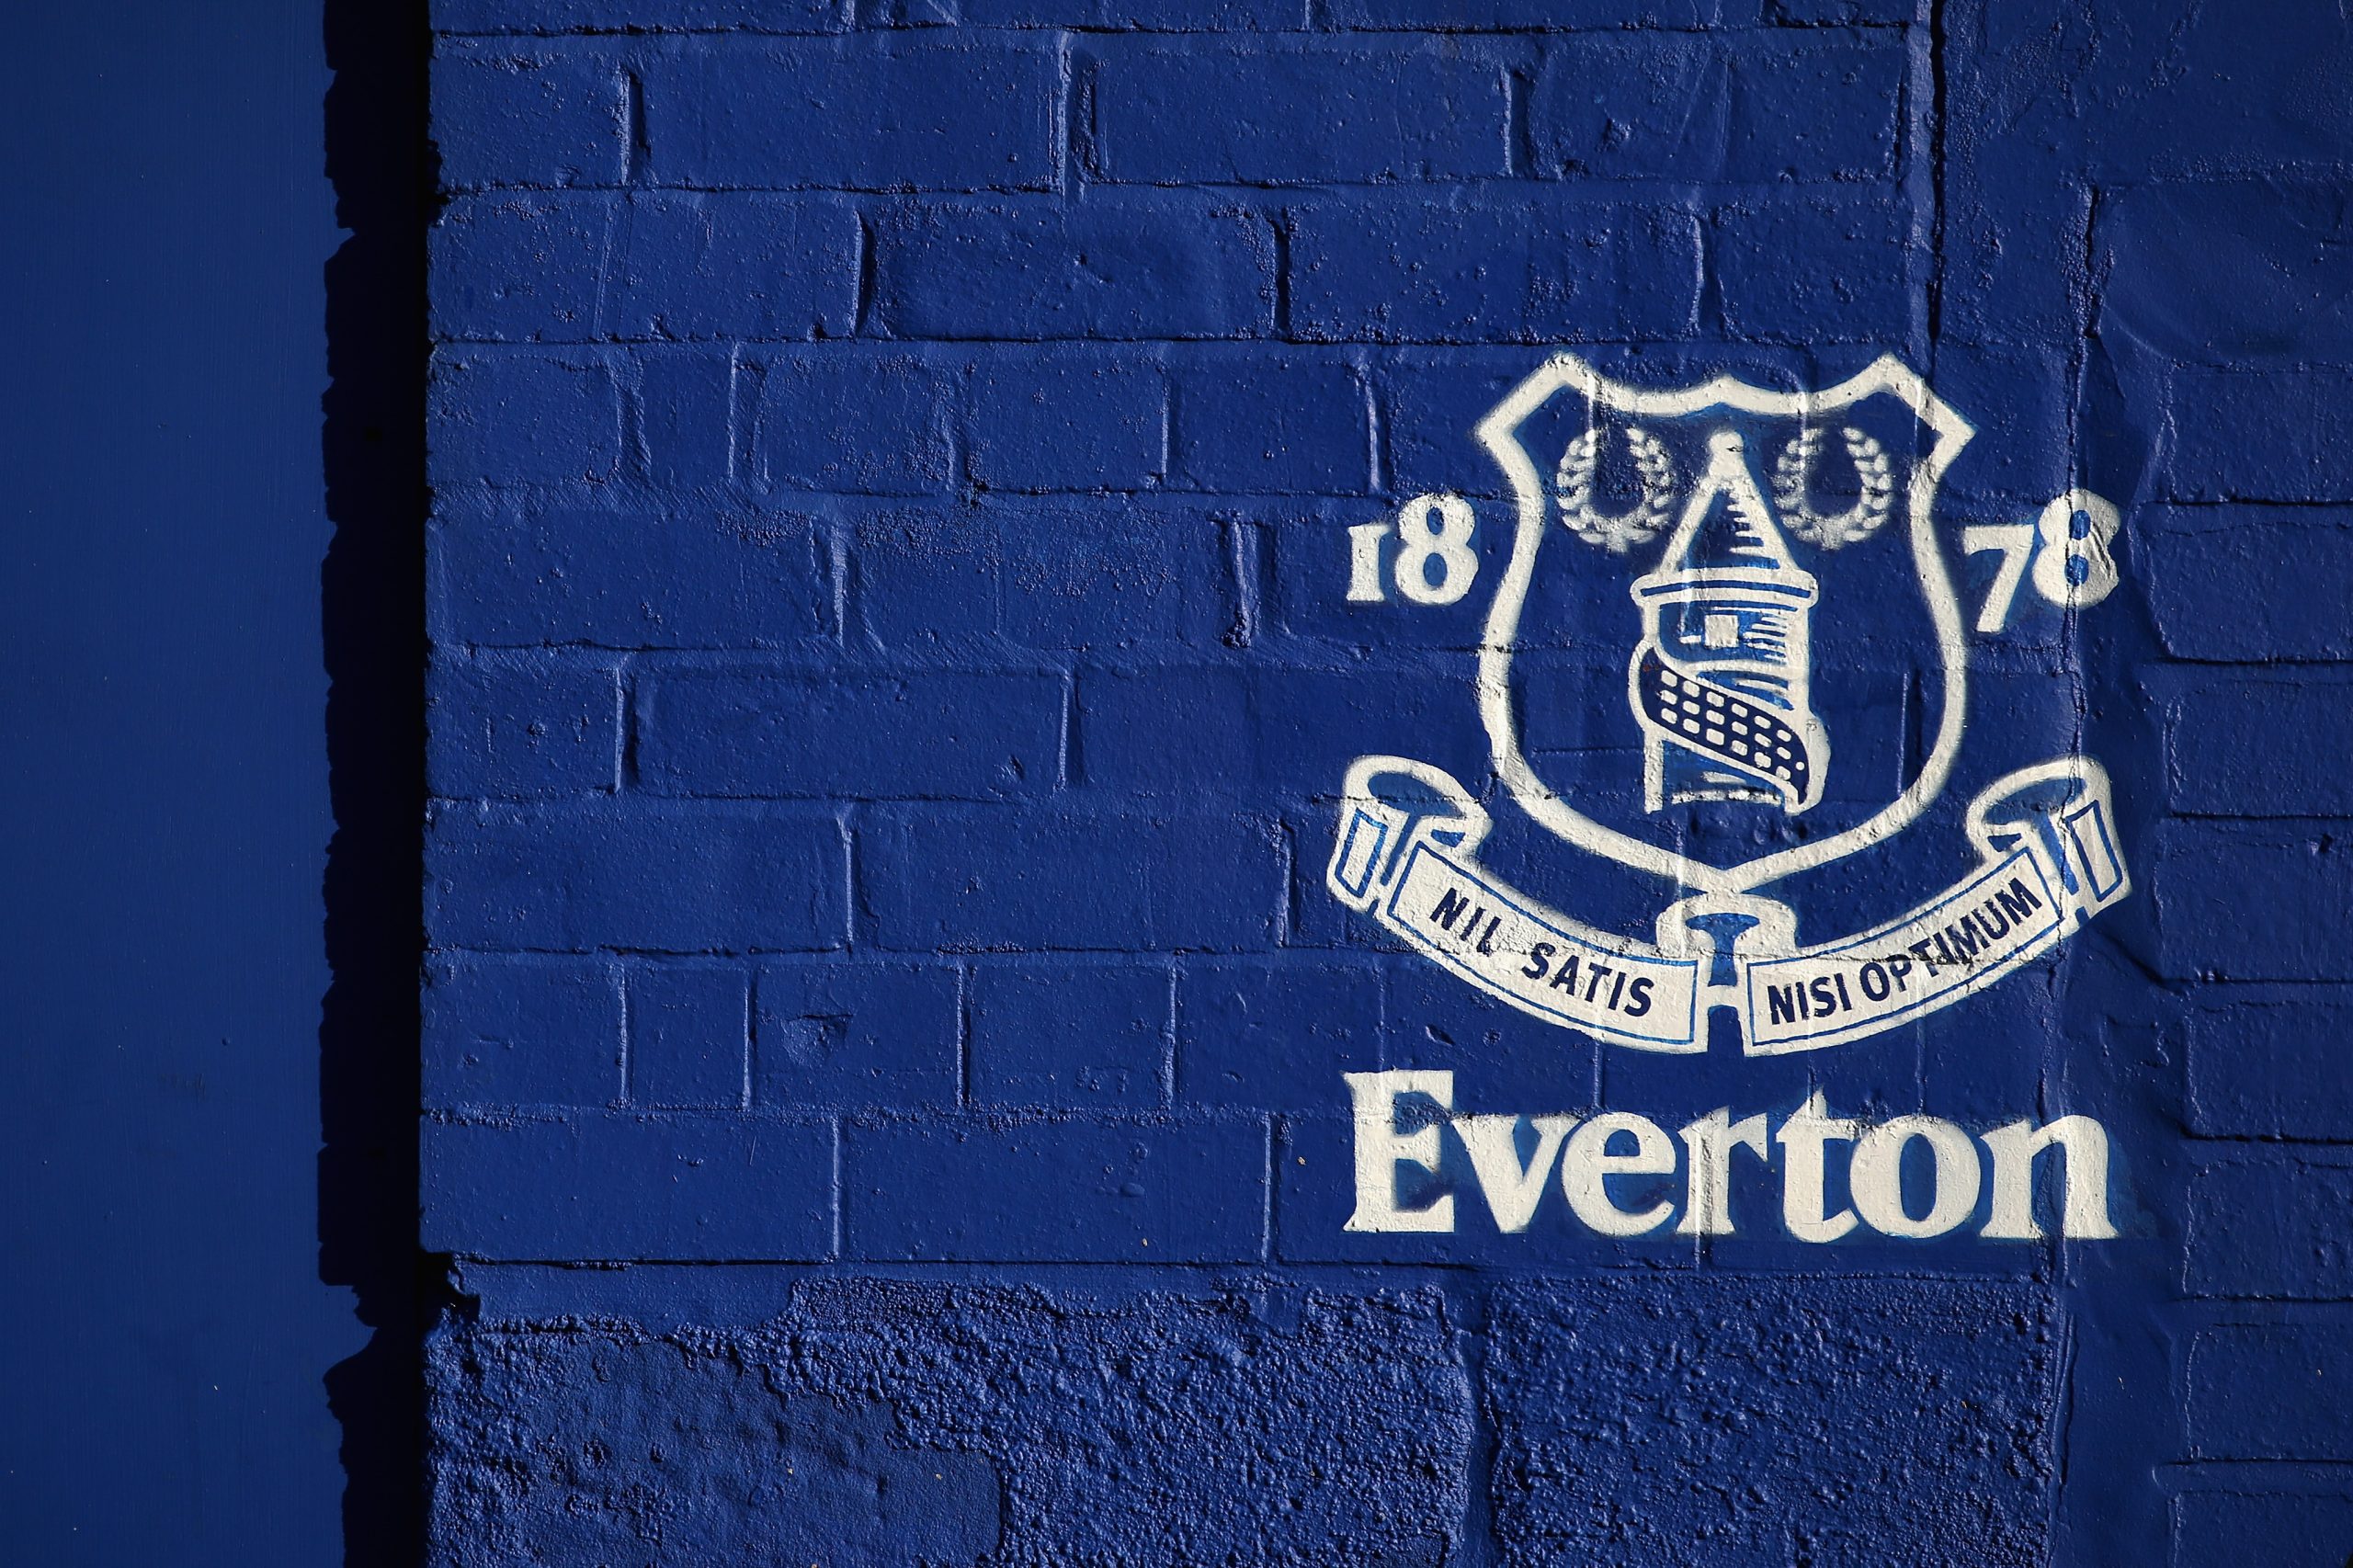 Everton and its logo